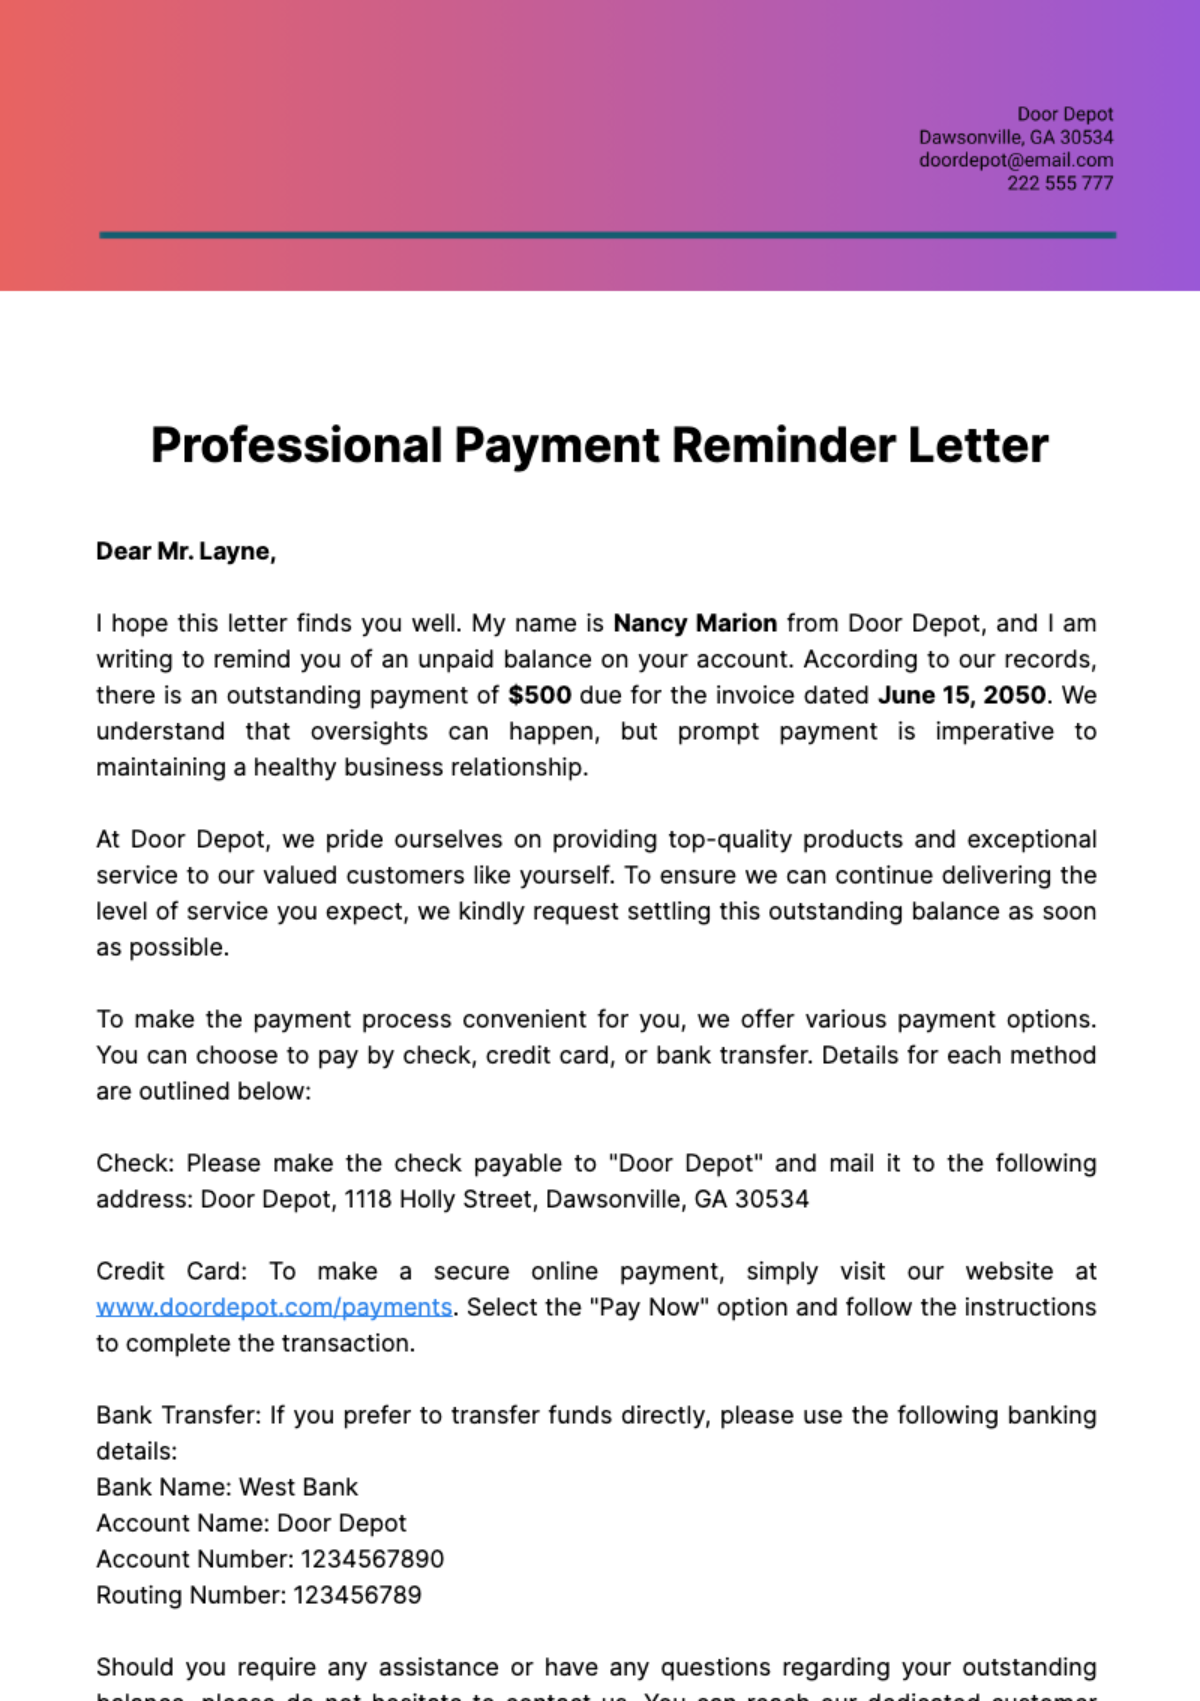 Free Professional Payment Reminder Letter Template